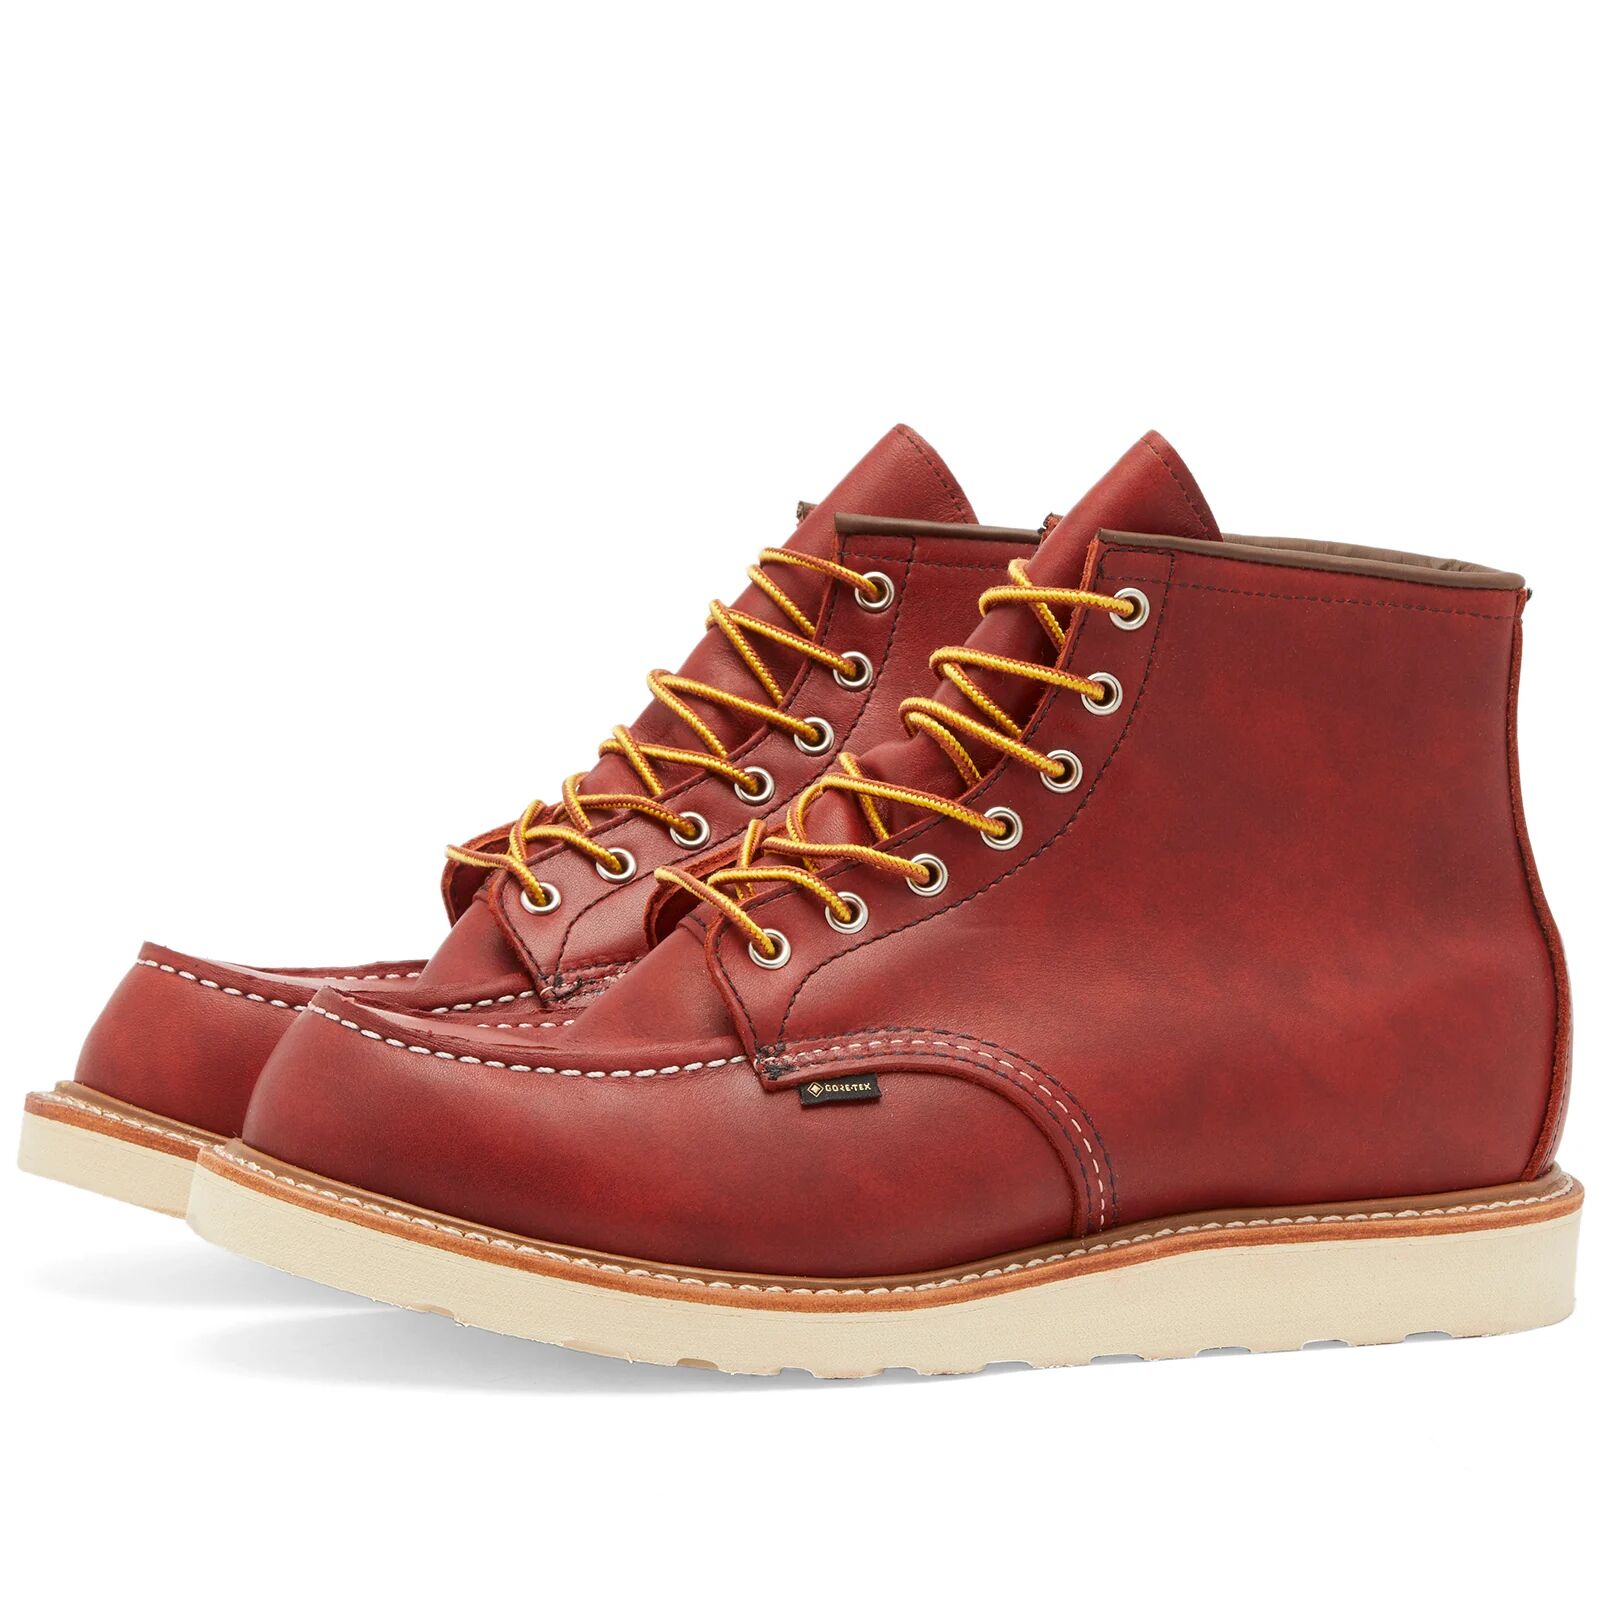 Red Wing Men's 8864 Heritage Work 6" Moc Toe Gore-Tex Boot in Russet Taos, Size UK 10.5